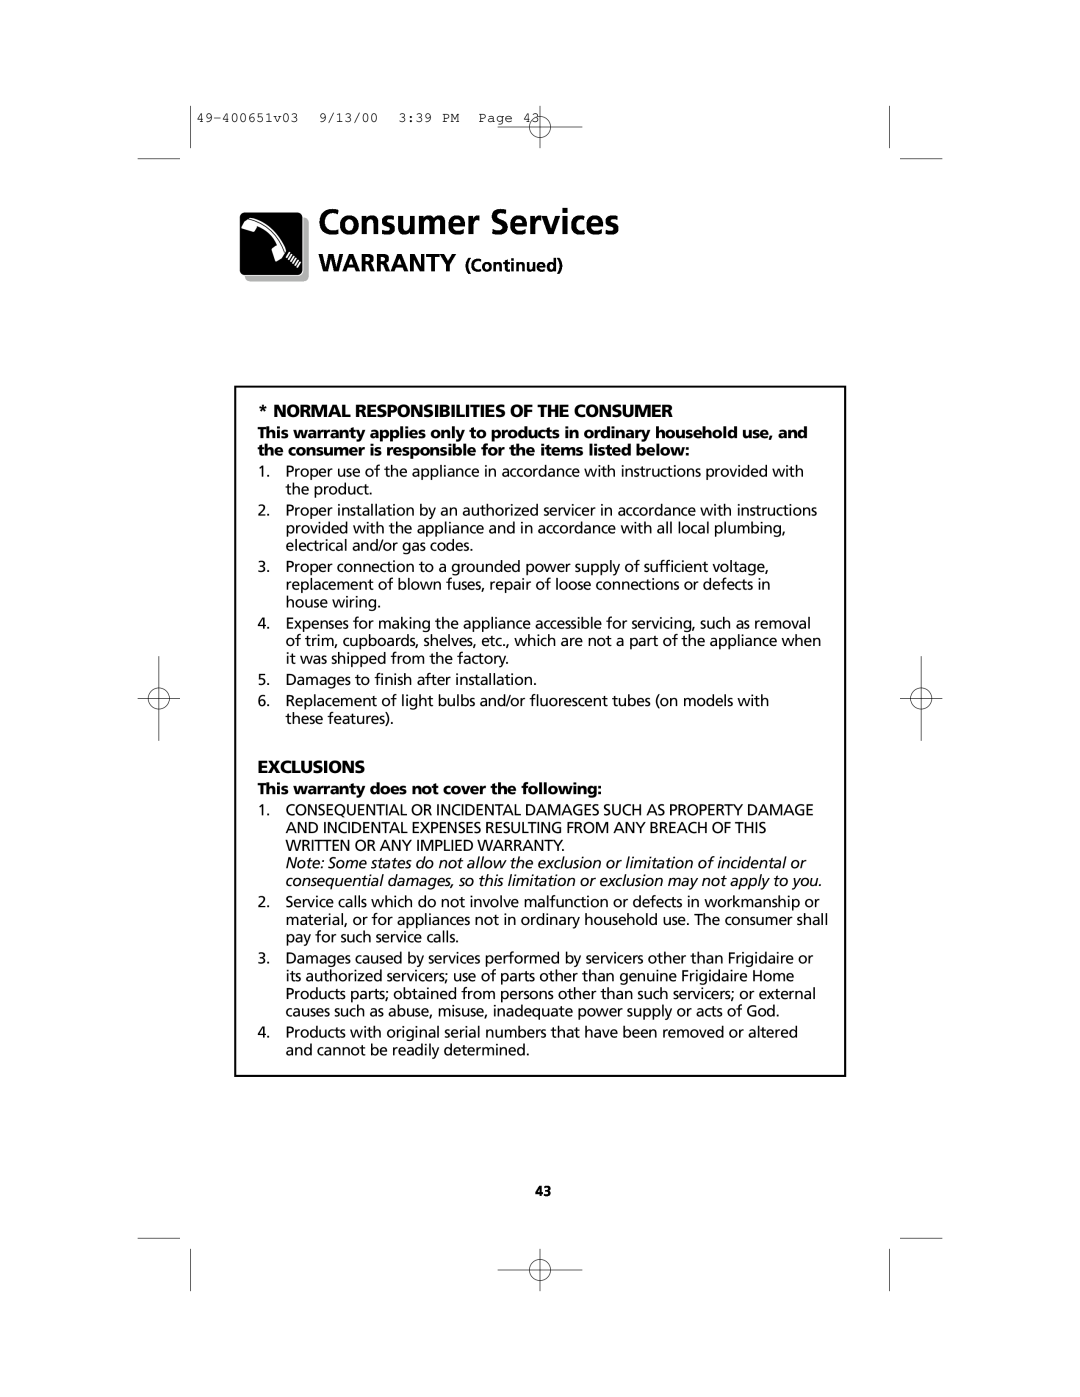 Frigidaire FMT148 warranty Consumer Services, WARRANTY Continued NORMAL RESPONSIBILITIES OF THE CONSUMER, Exclusions 